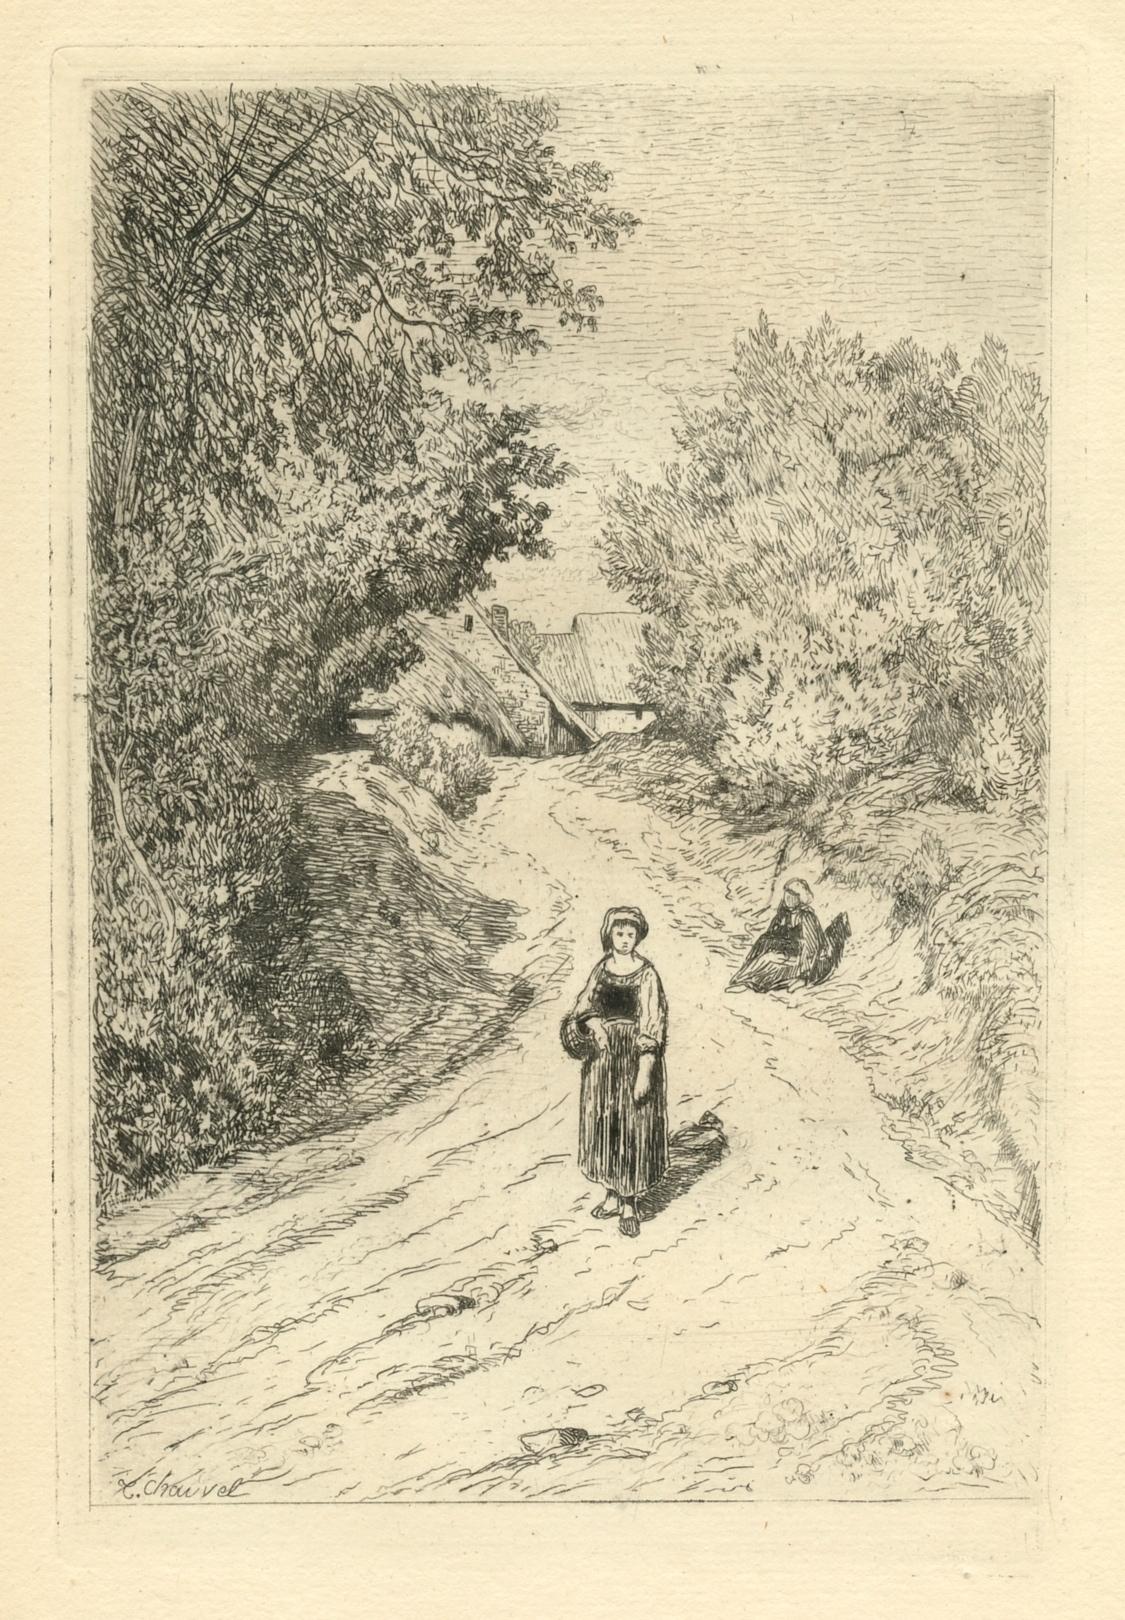 "A Country Lane" original etching - Print by Theophile Narcisse Chauvel